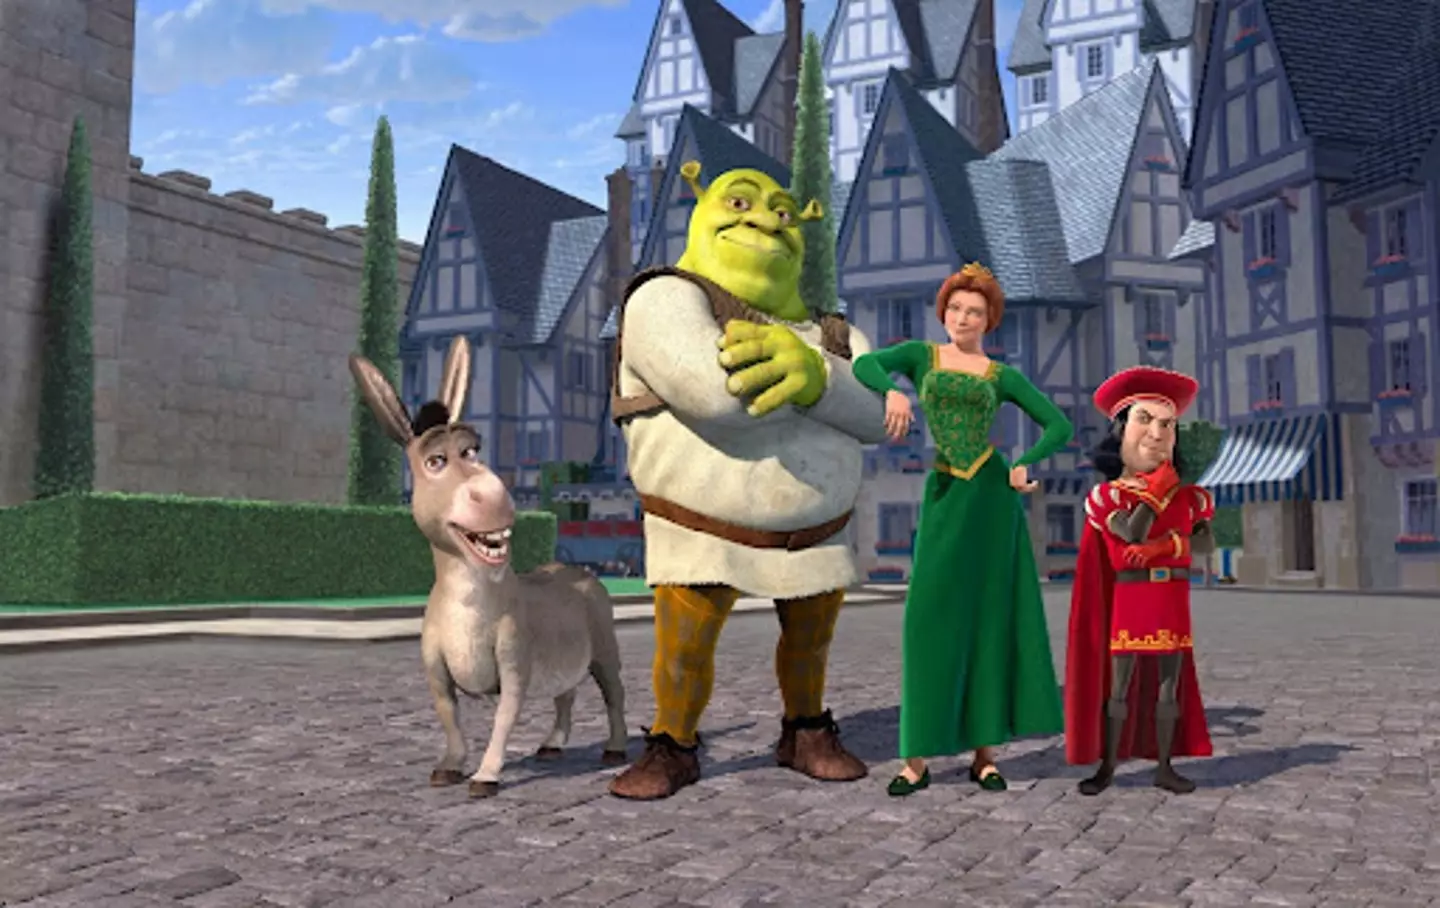 Shrek saved Fiona from the dragon-guarded tower (